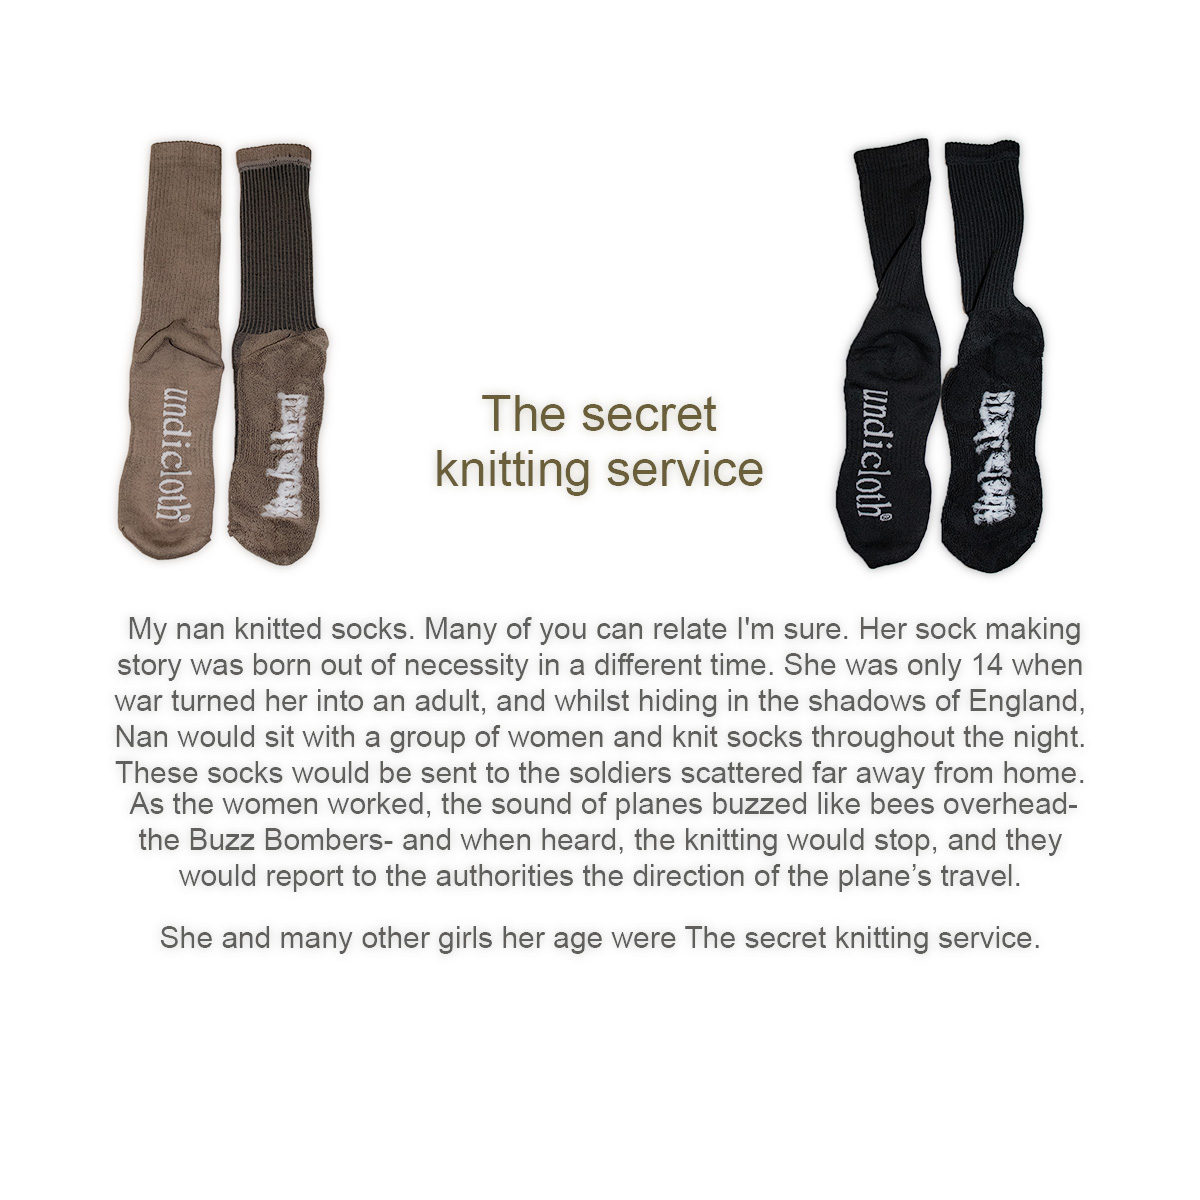 My nan knitted socks. Many of you can relate I'm sure. Her sock making story was born out of necessity in a different time.

She and many other girls her age were The secret knitting service.

#socks #undicloth #ethicalfashion #fashion #madeinaustralia #sockfashion #smallbusiness